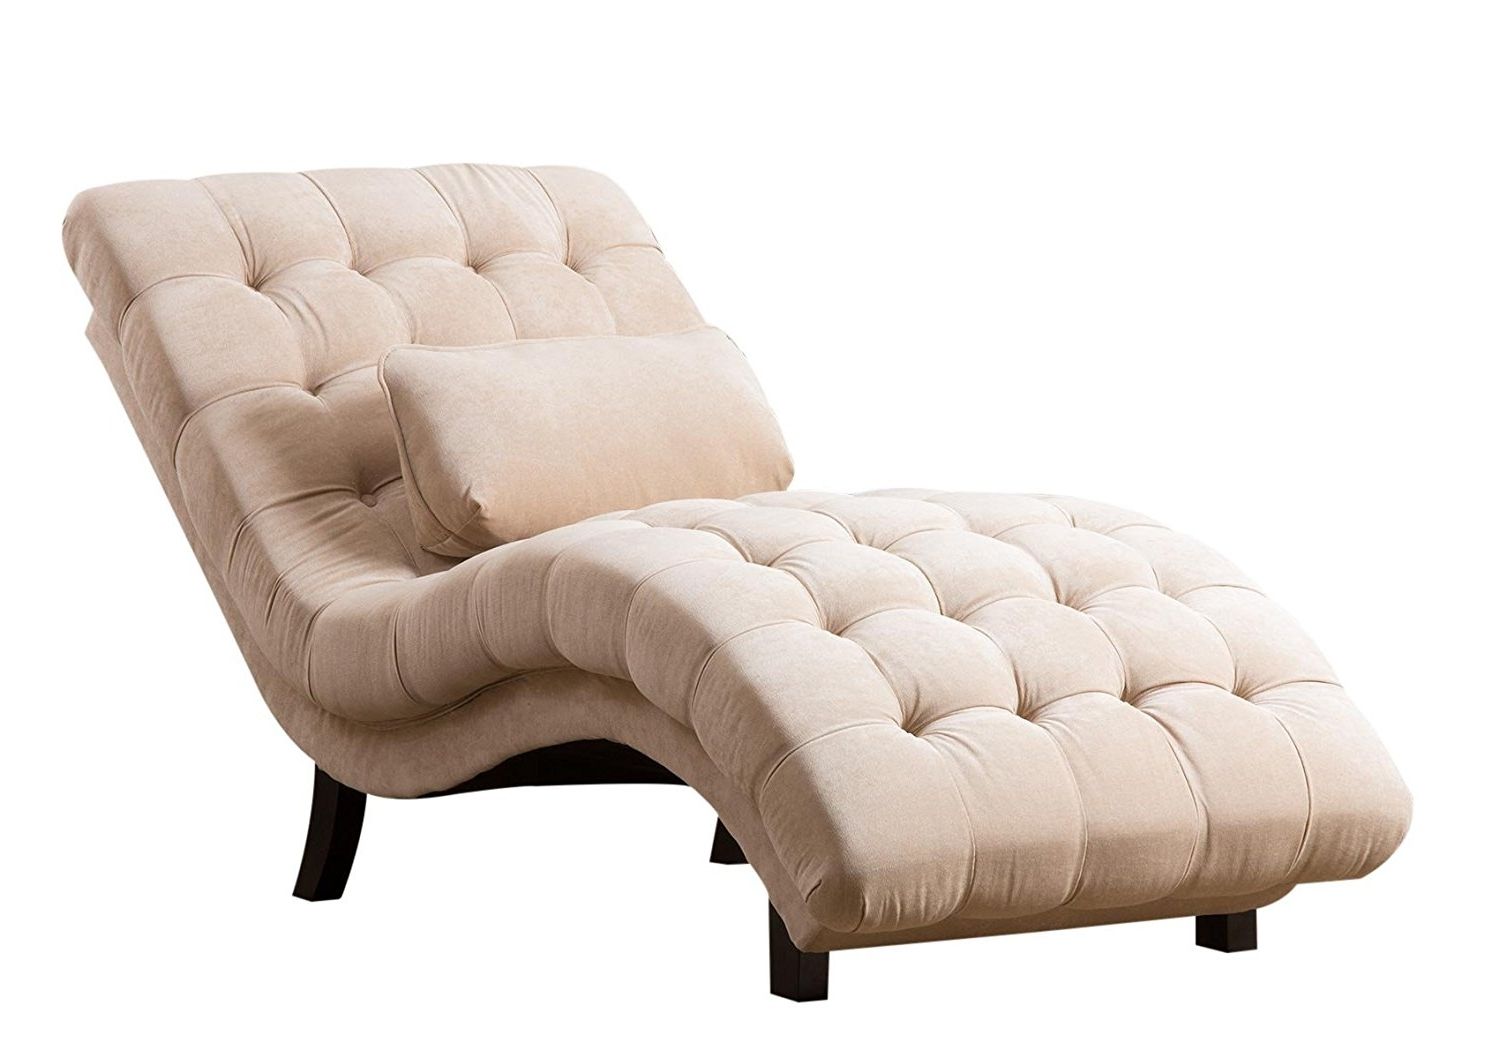 Upholstered Chaise Lounges For Well Known Amazon: Abbyson Carmen Cream Fabric Chaise: Home & Kitchen (View 6 of 15)